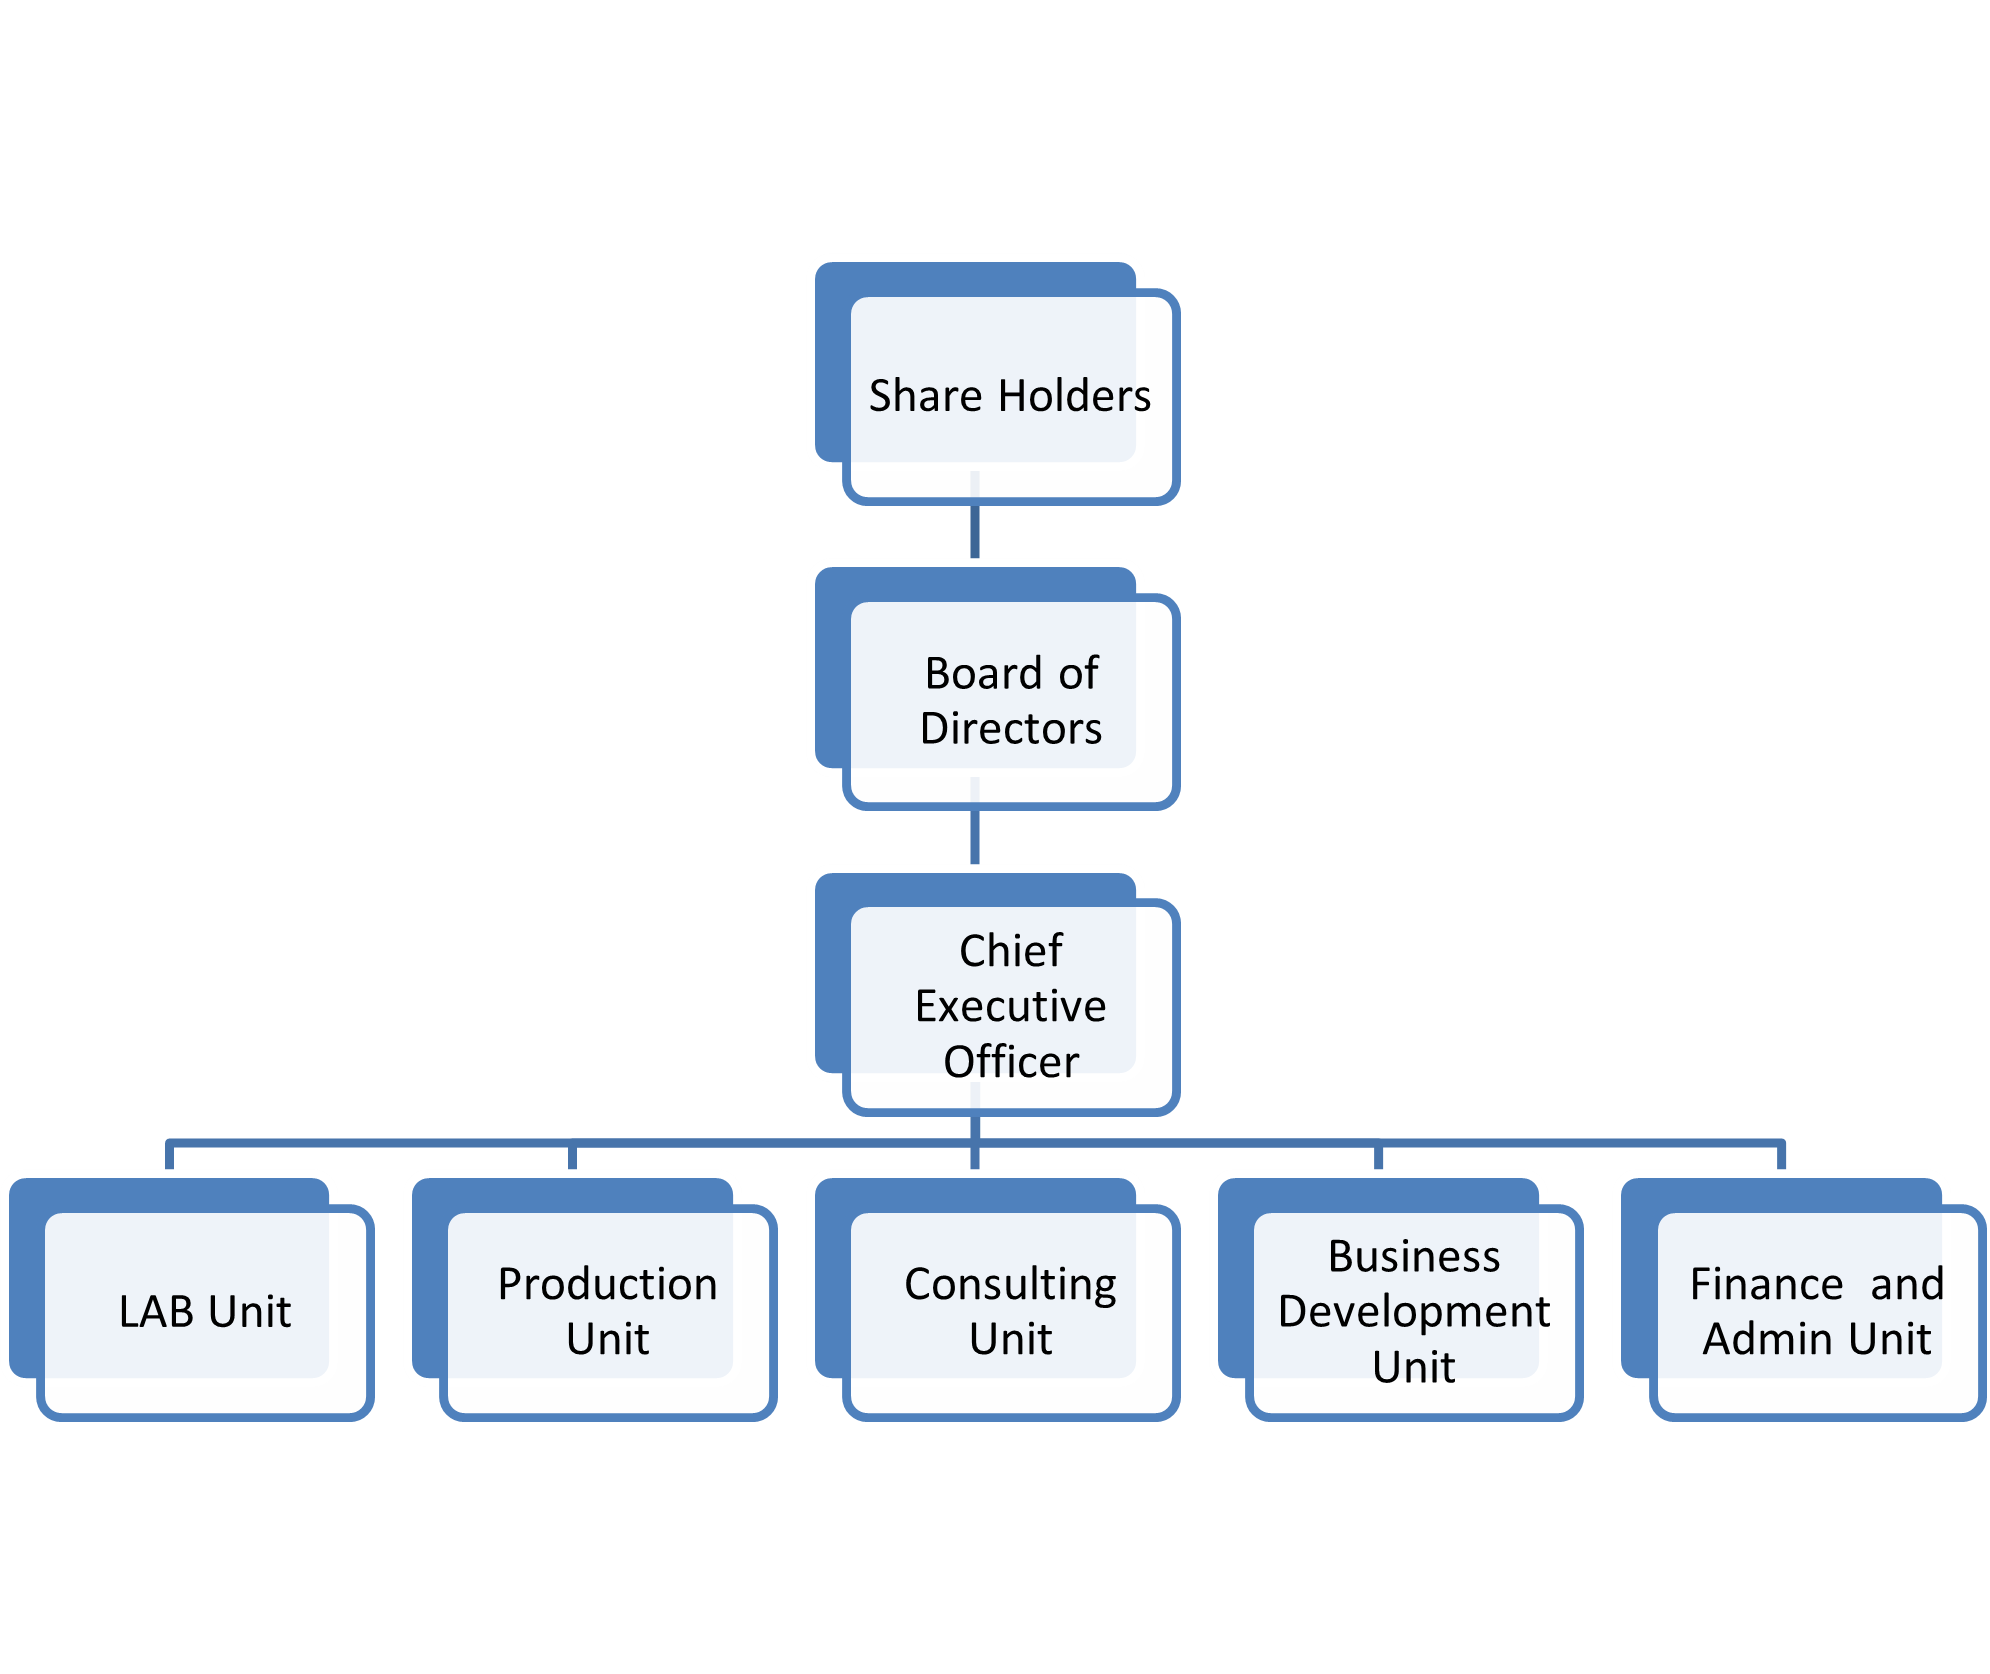 Image of Organization Structure